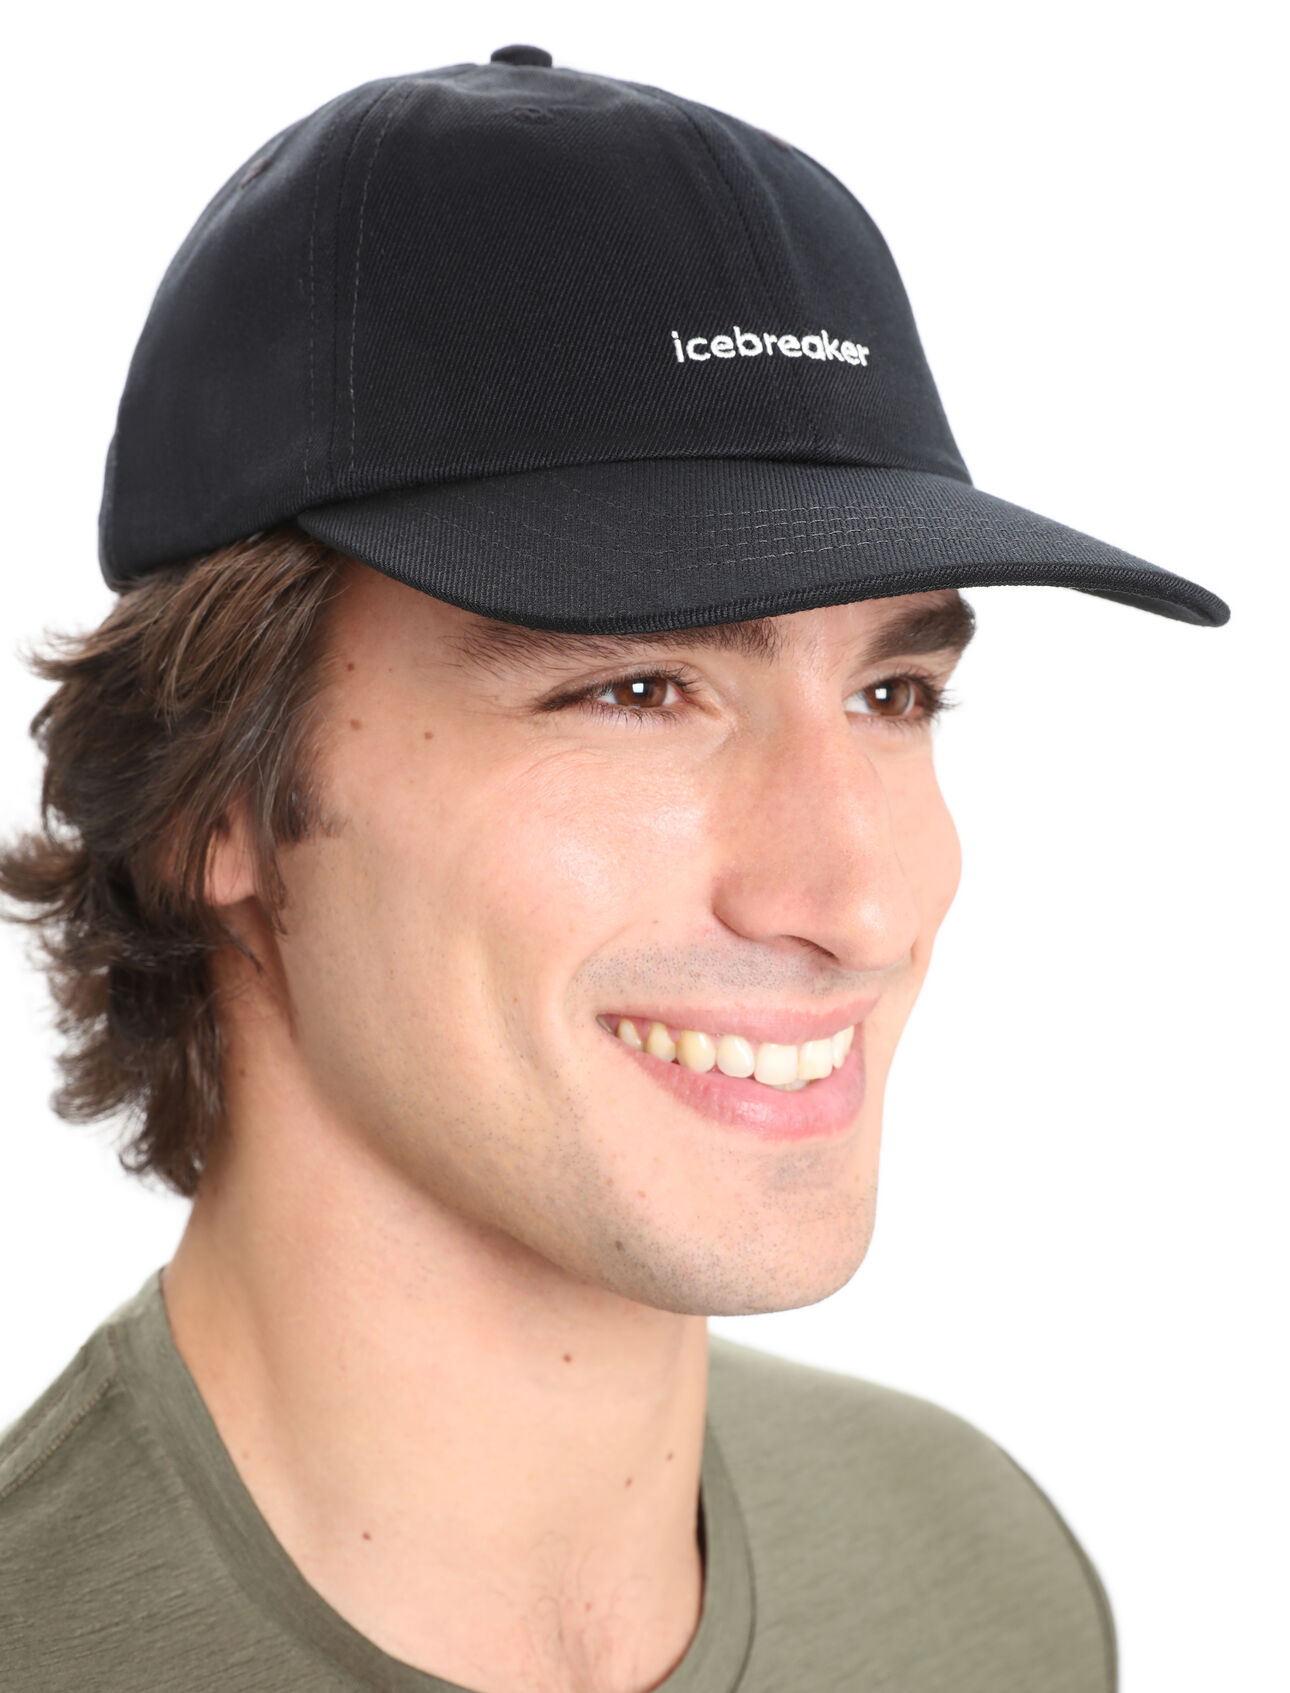 Unisex Merino Icebreaker 6 Panel Hat A classic cap made with 100% natural materials, the icebreaker 6 Panel Hat blends naturally breathable and odor-resistant merino wool with soft organic cotton.